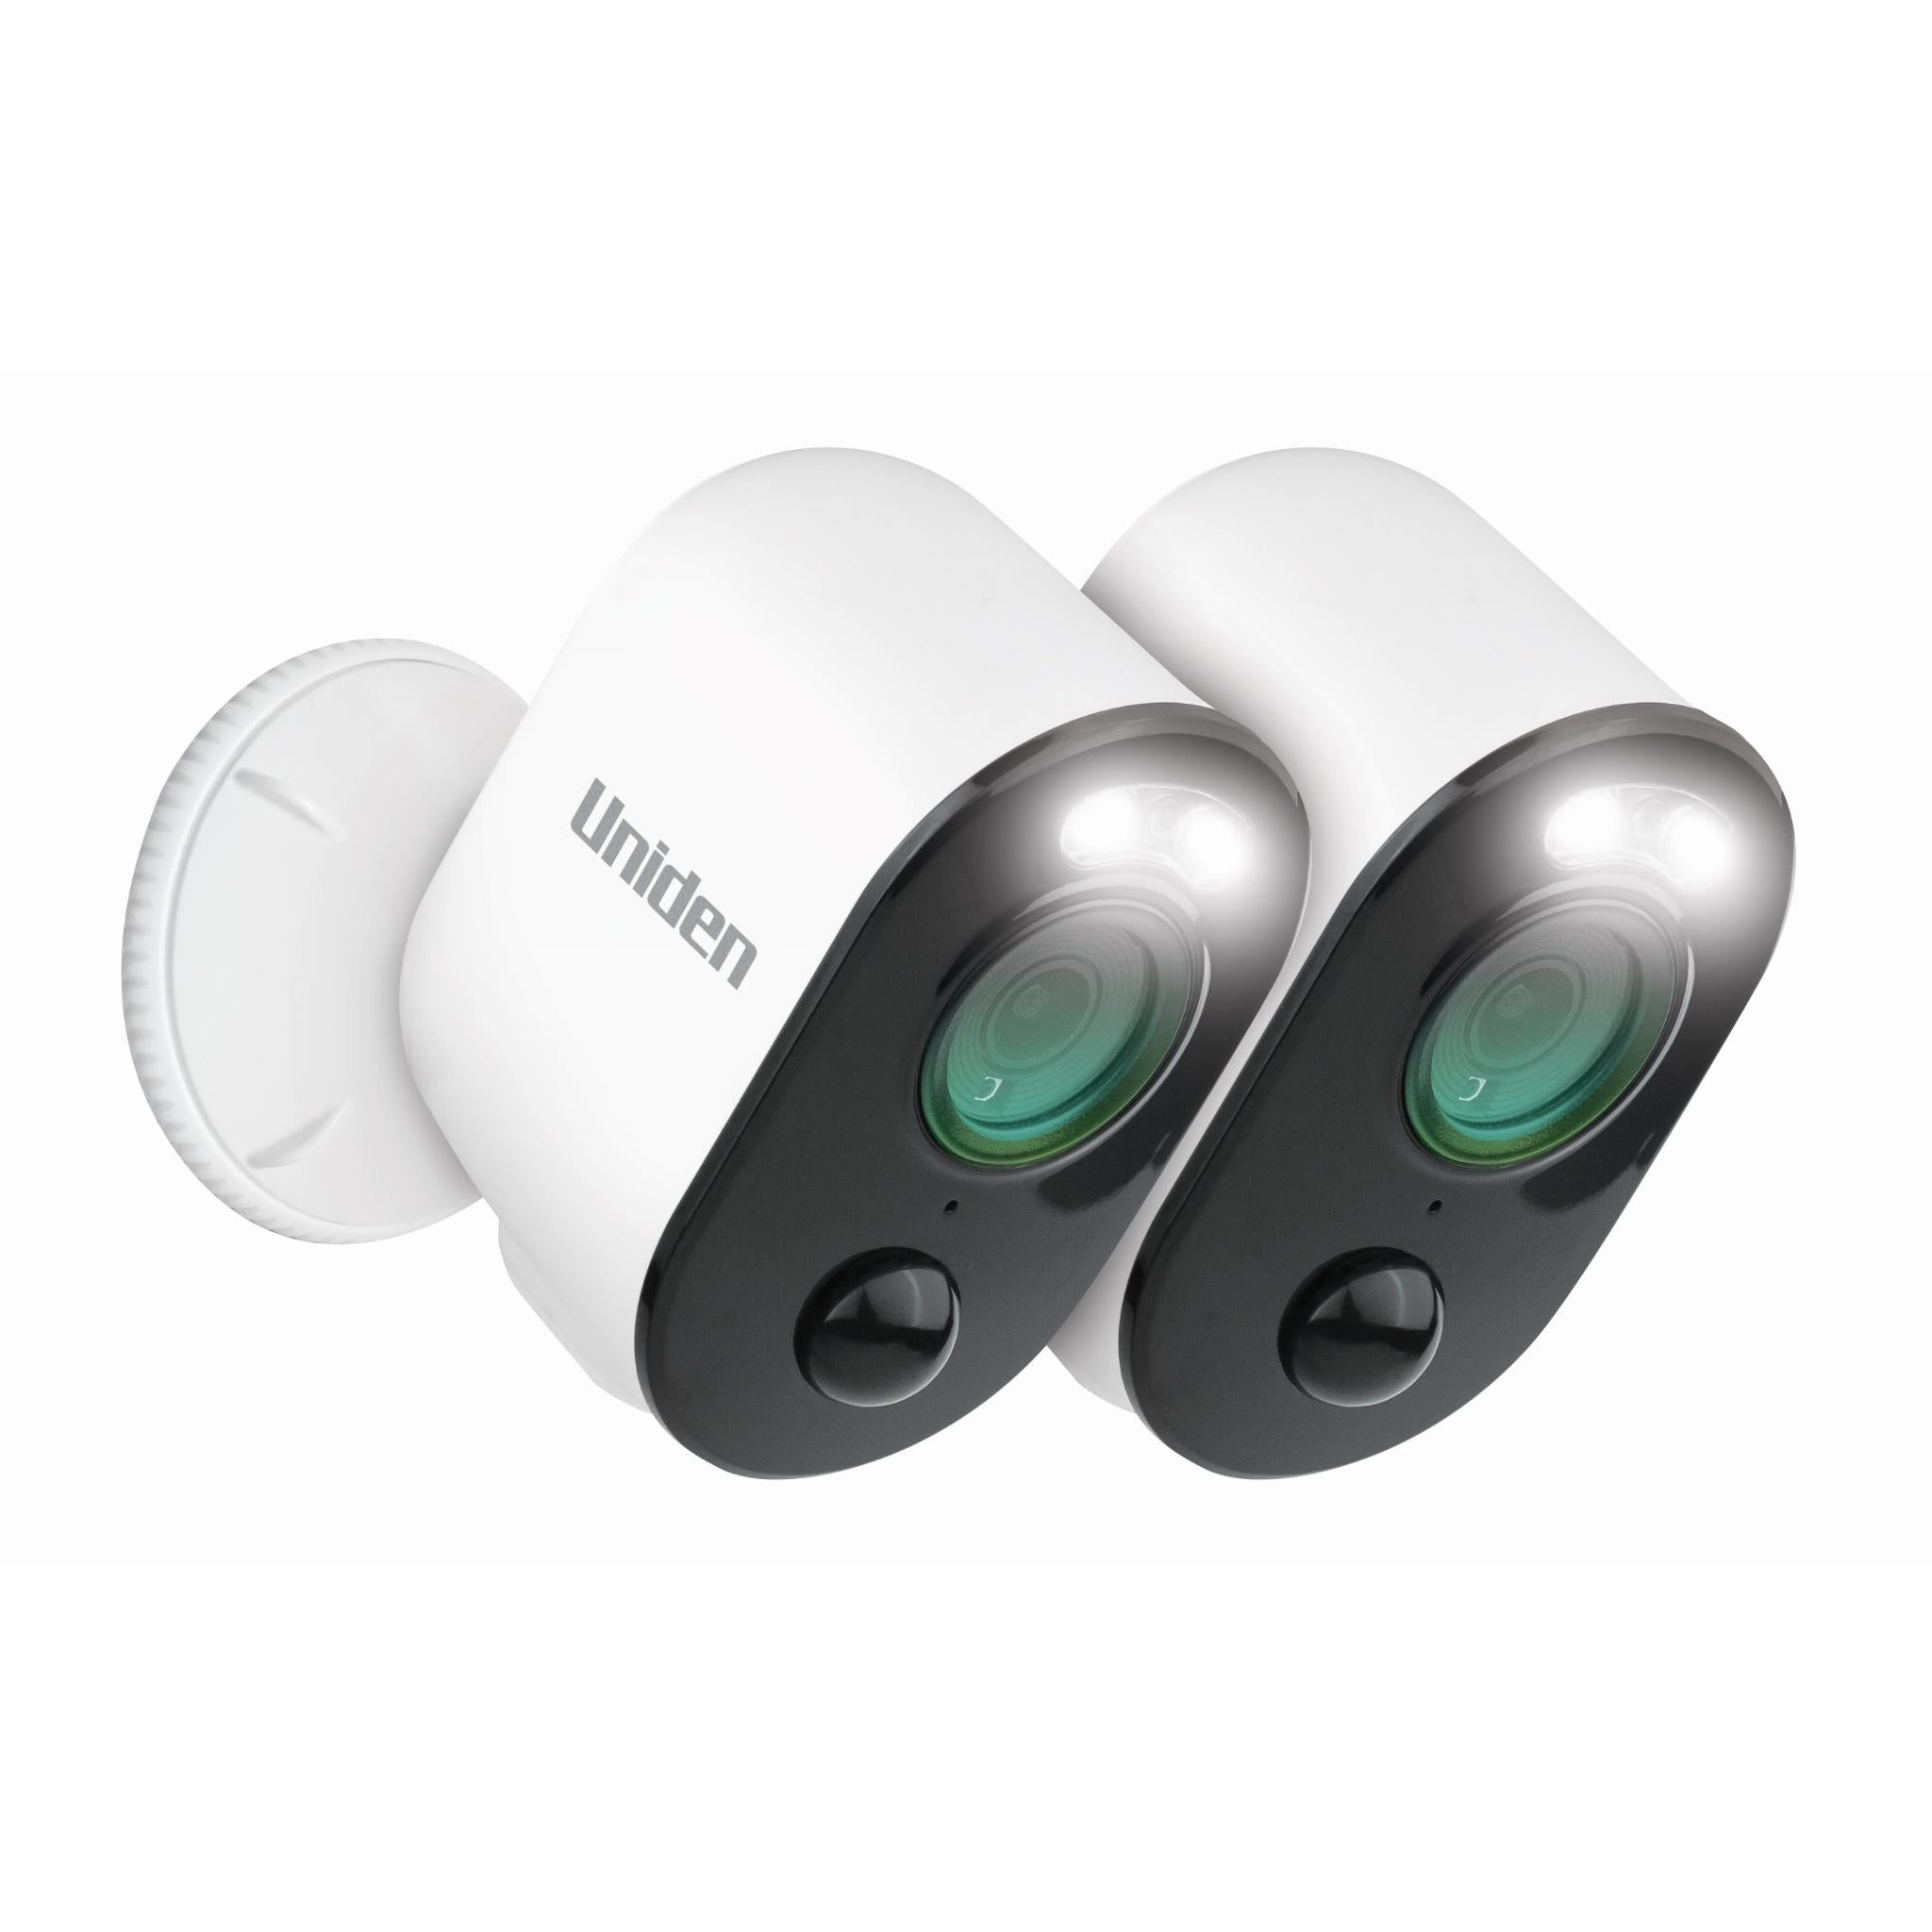 uniden app cam solo pro wirefree security camera (twin pack)